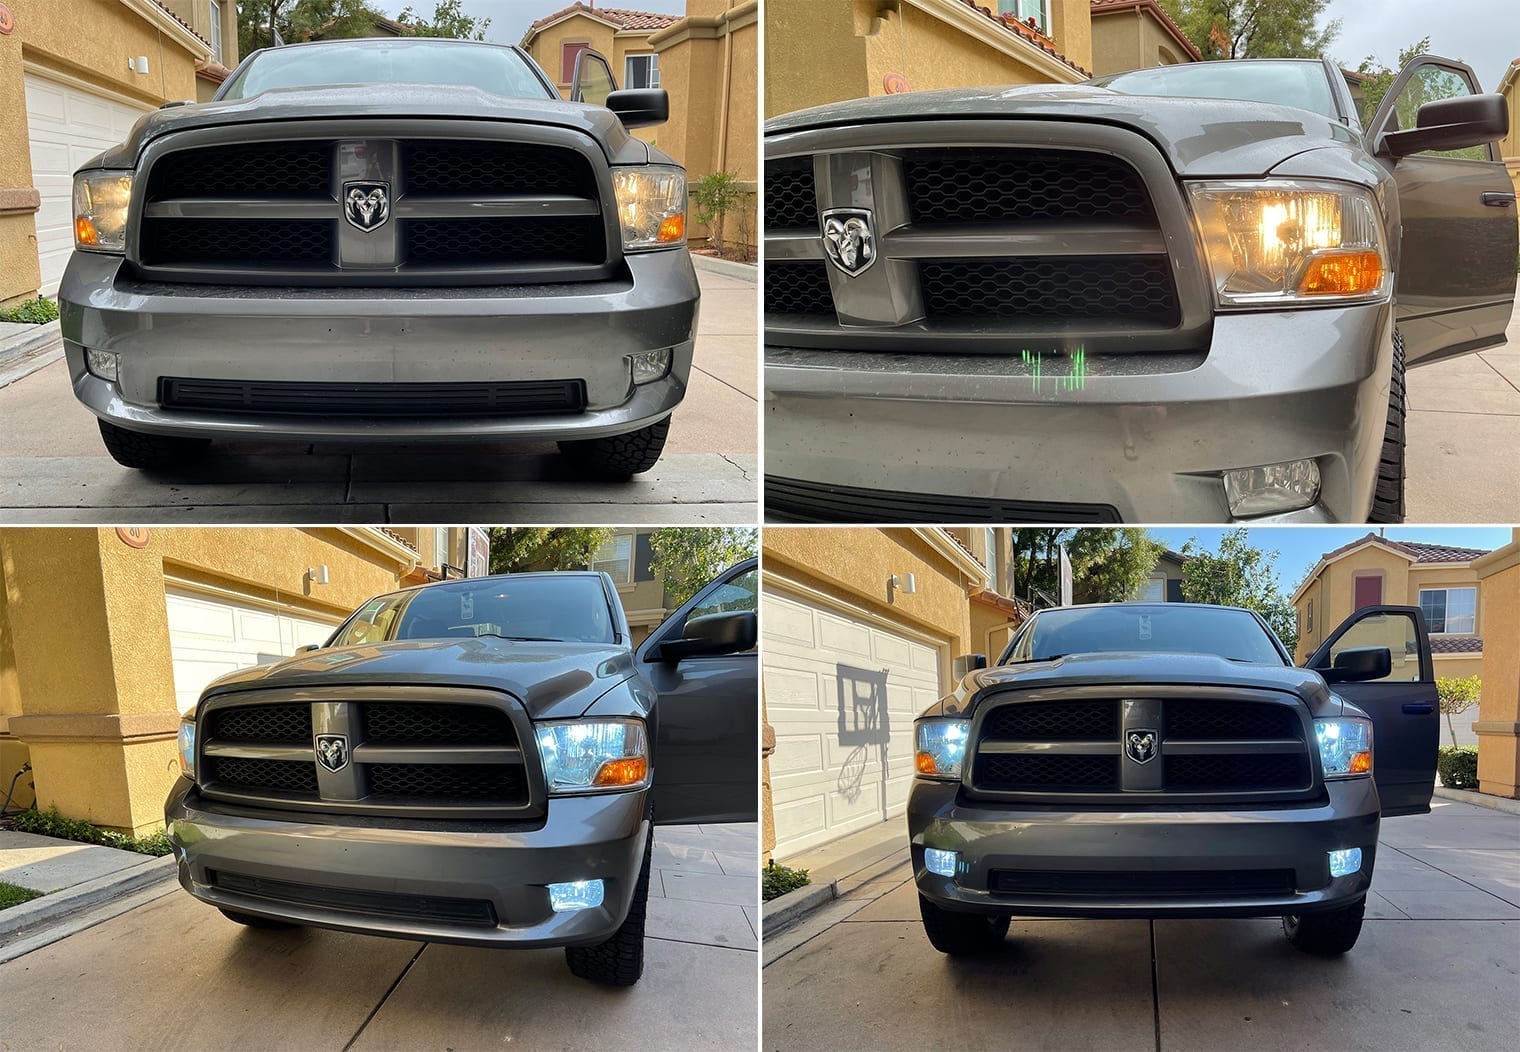 Before and after image of HID headlights installation for how to article google search results